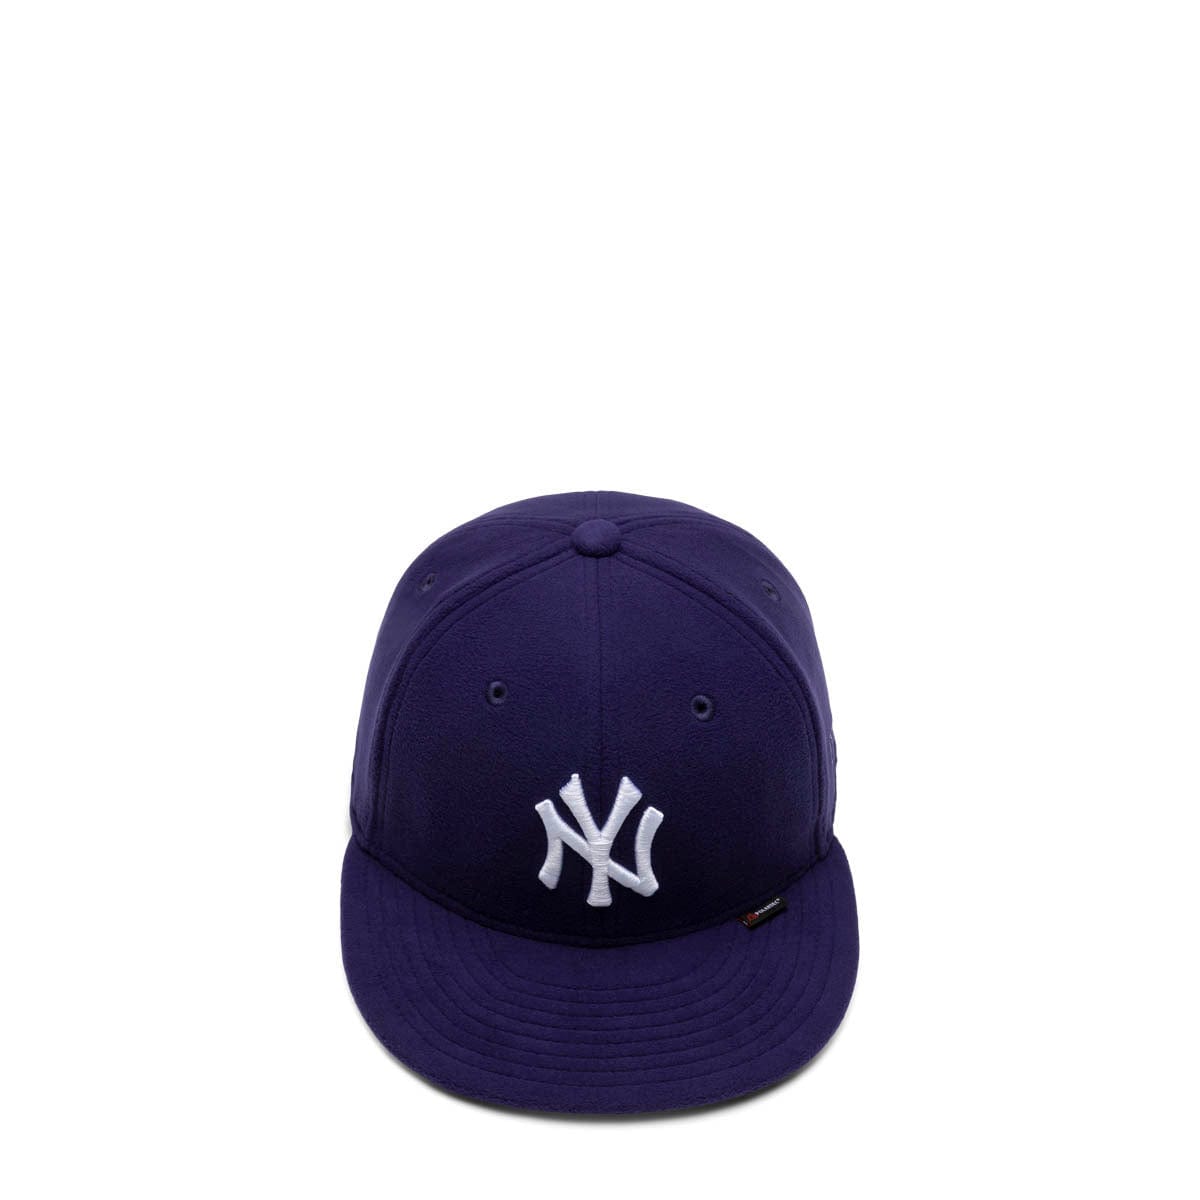 59FIFTY New York Yankees Polartec Fitted Cap